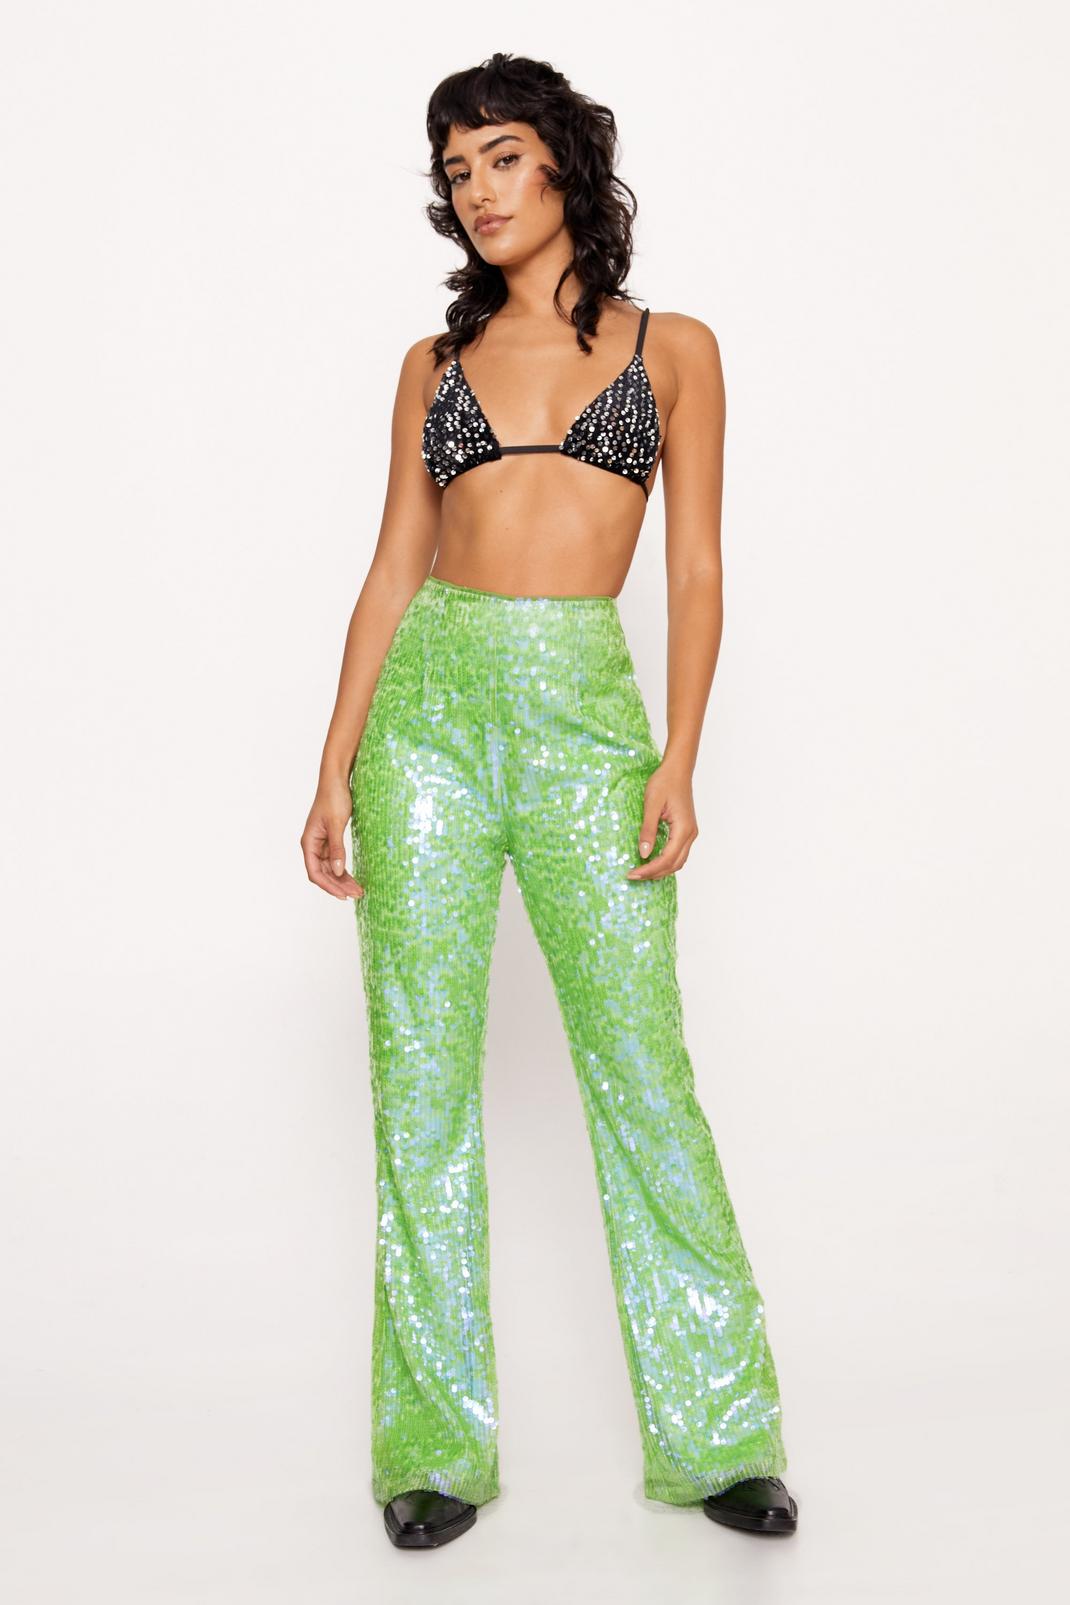 Sequin Pants - Have Need Want